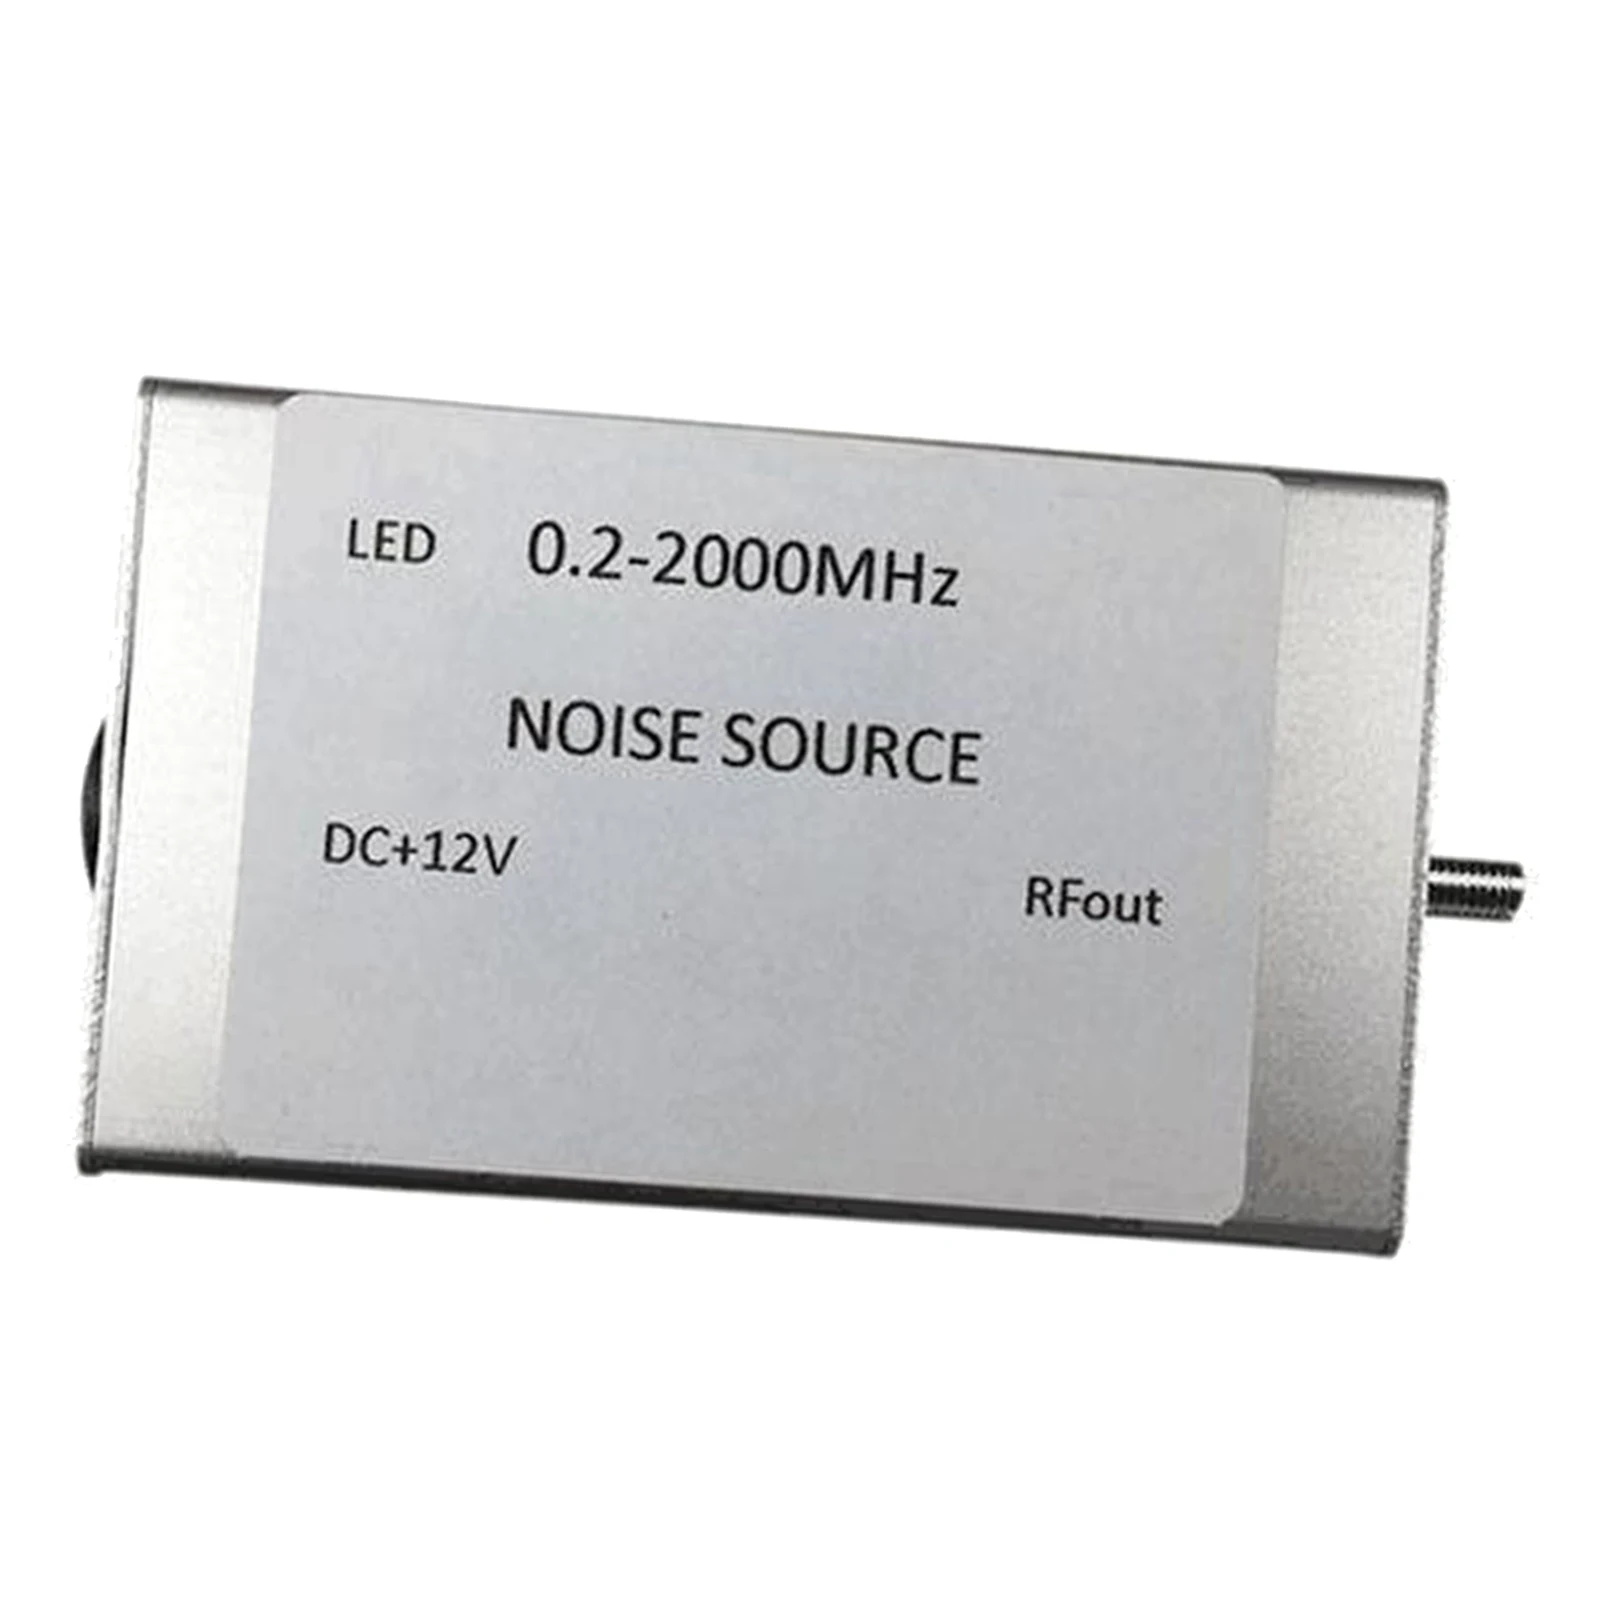 Noise Signal Generator DC+12V Simple Spectrum Tracking Source 0.2-2000M